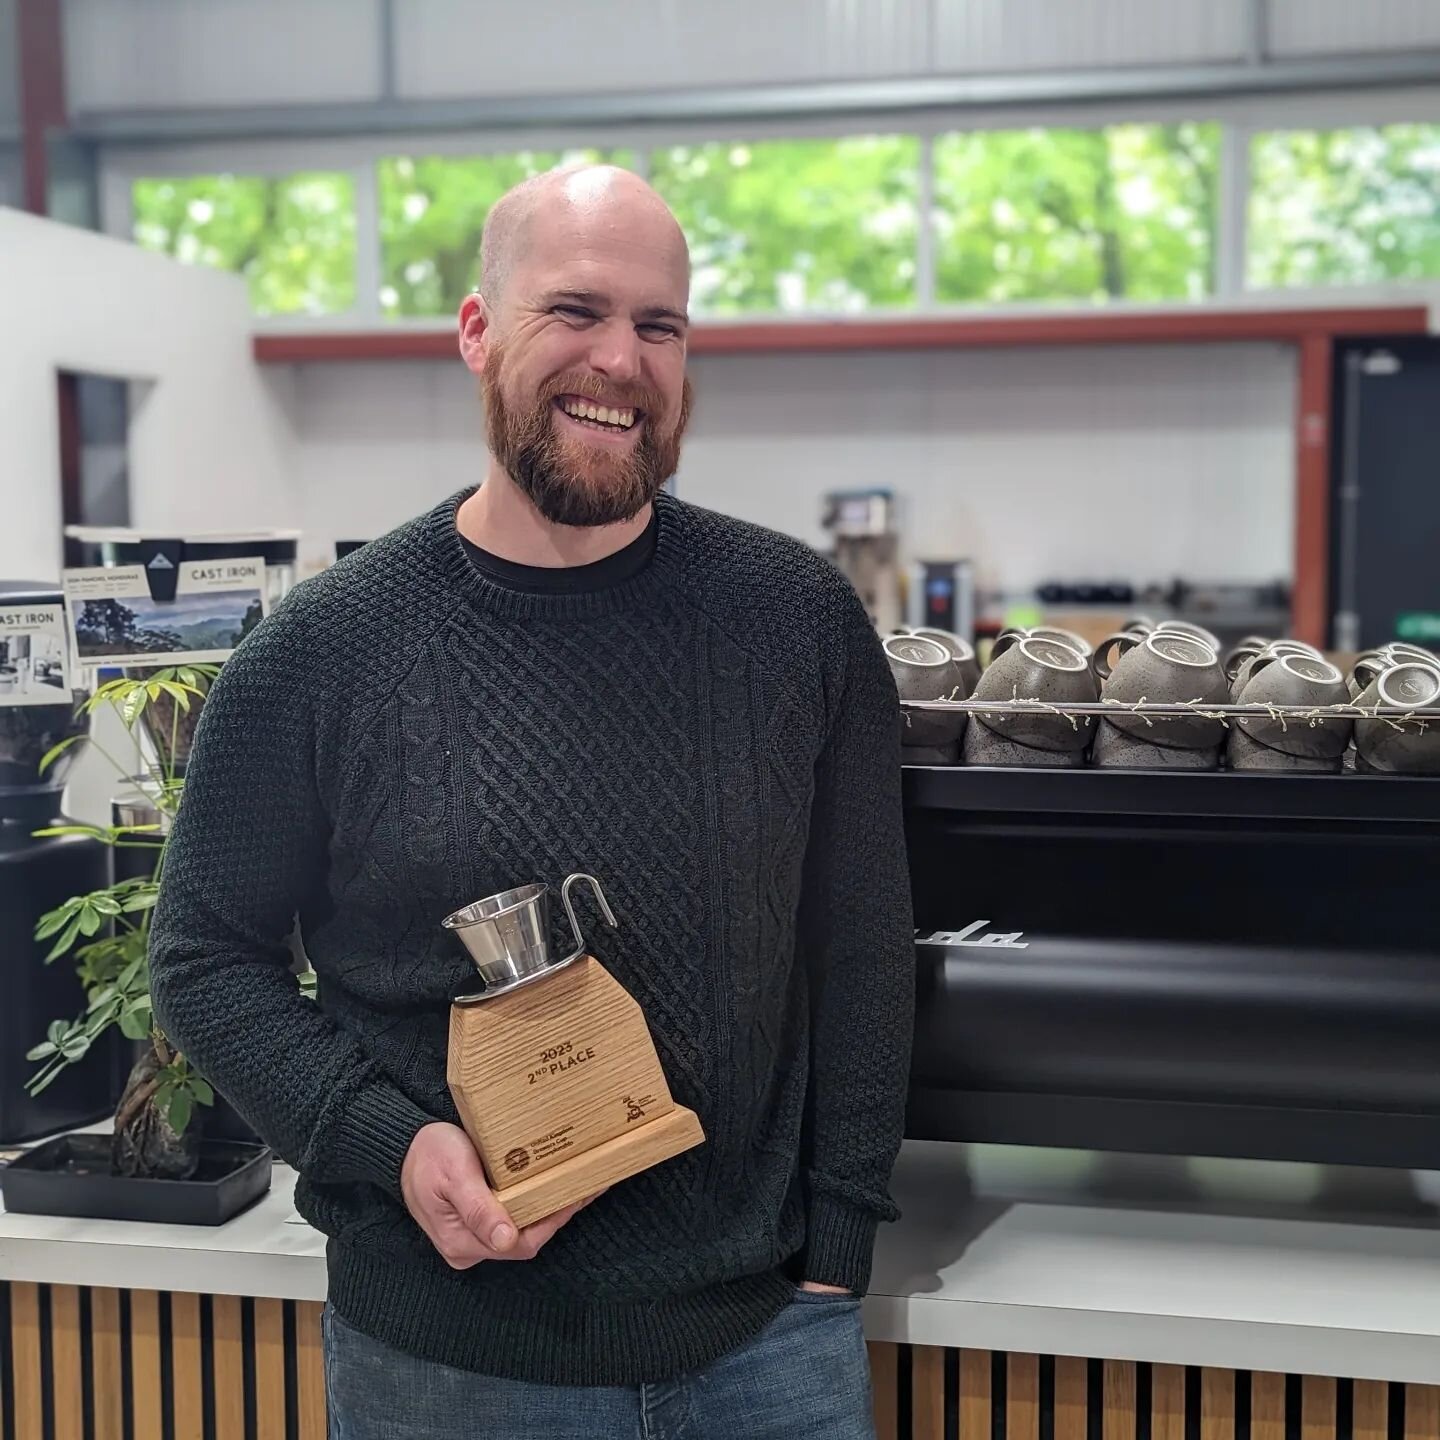 2nd Place!!!! Little old market town Tonbridge is now home to the 2nd best filter brewer in the ruddy UK!!!! 

As some of you will now know, last week our very own @davidleeper15 competed in the Semi-Finals and then Final of the @scauk Brewers Cup. U